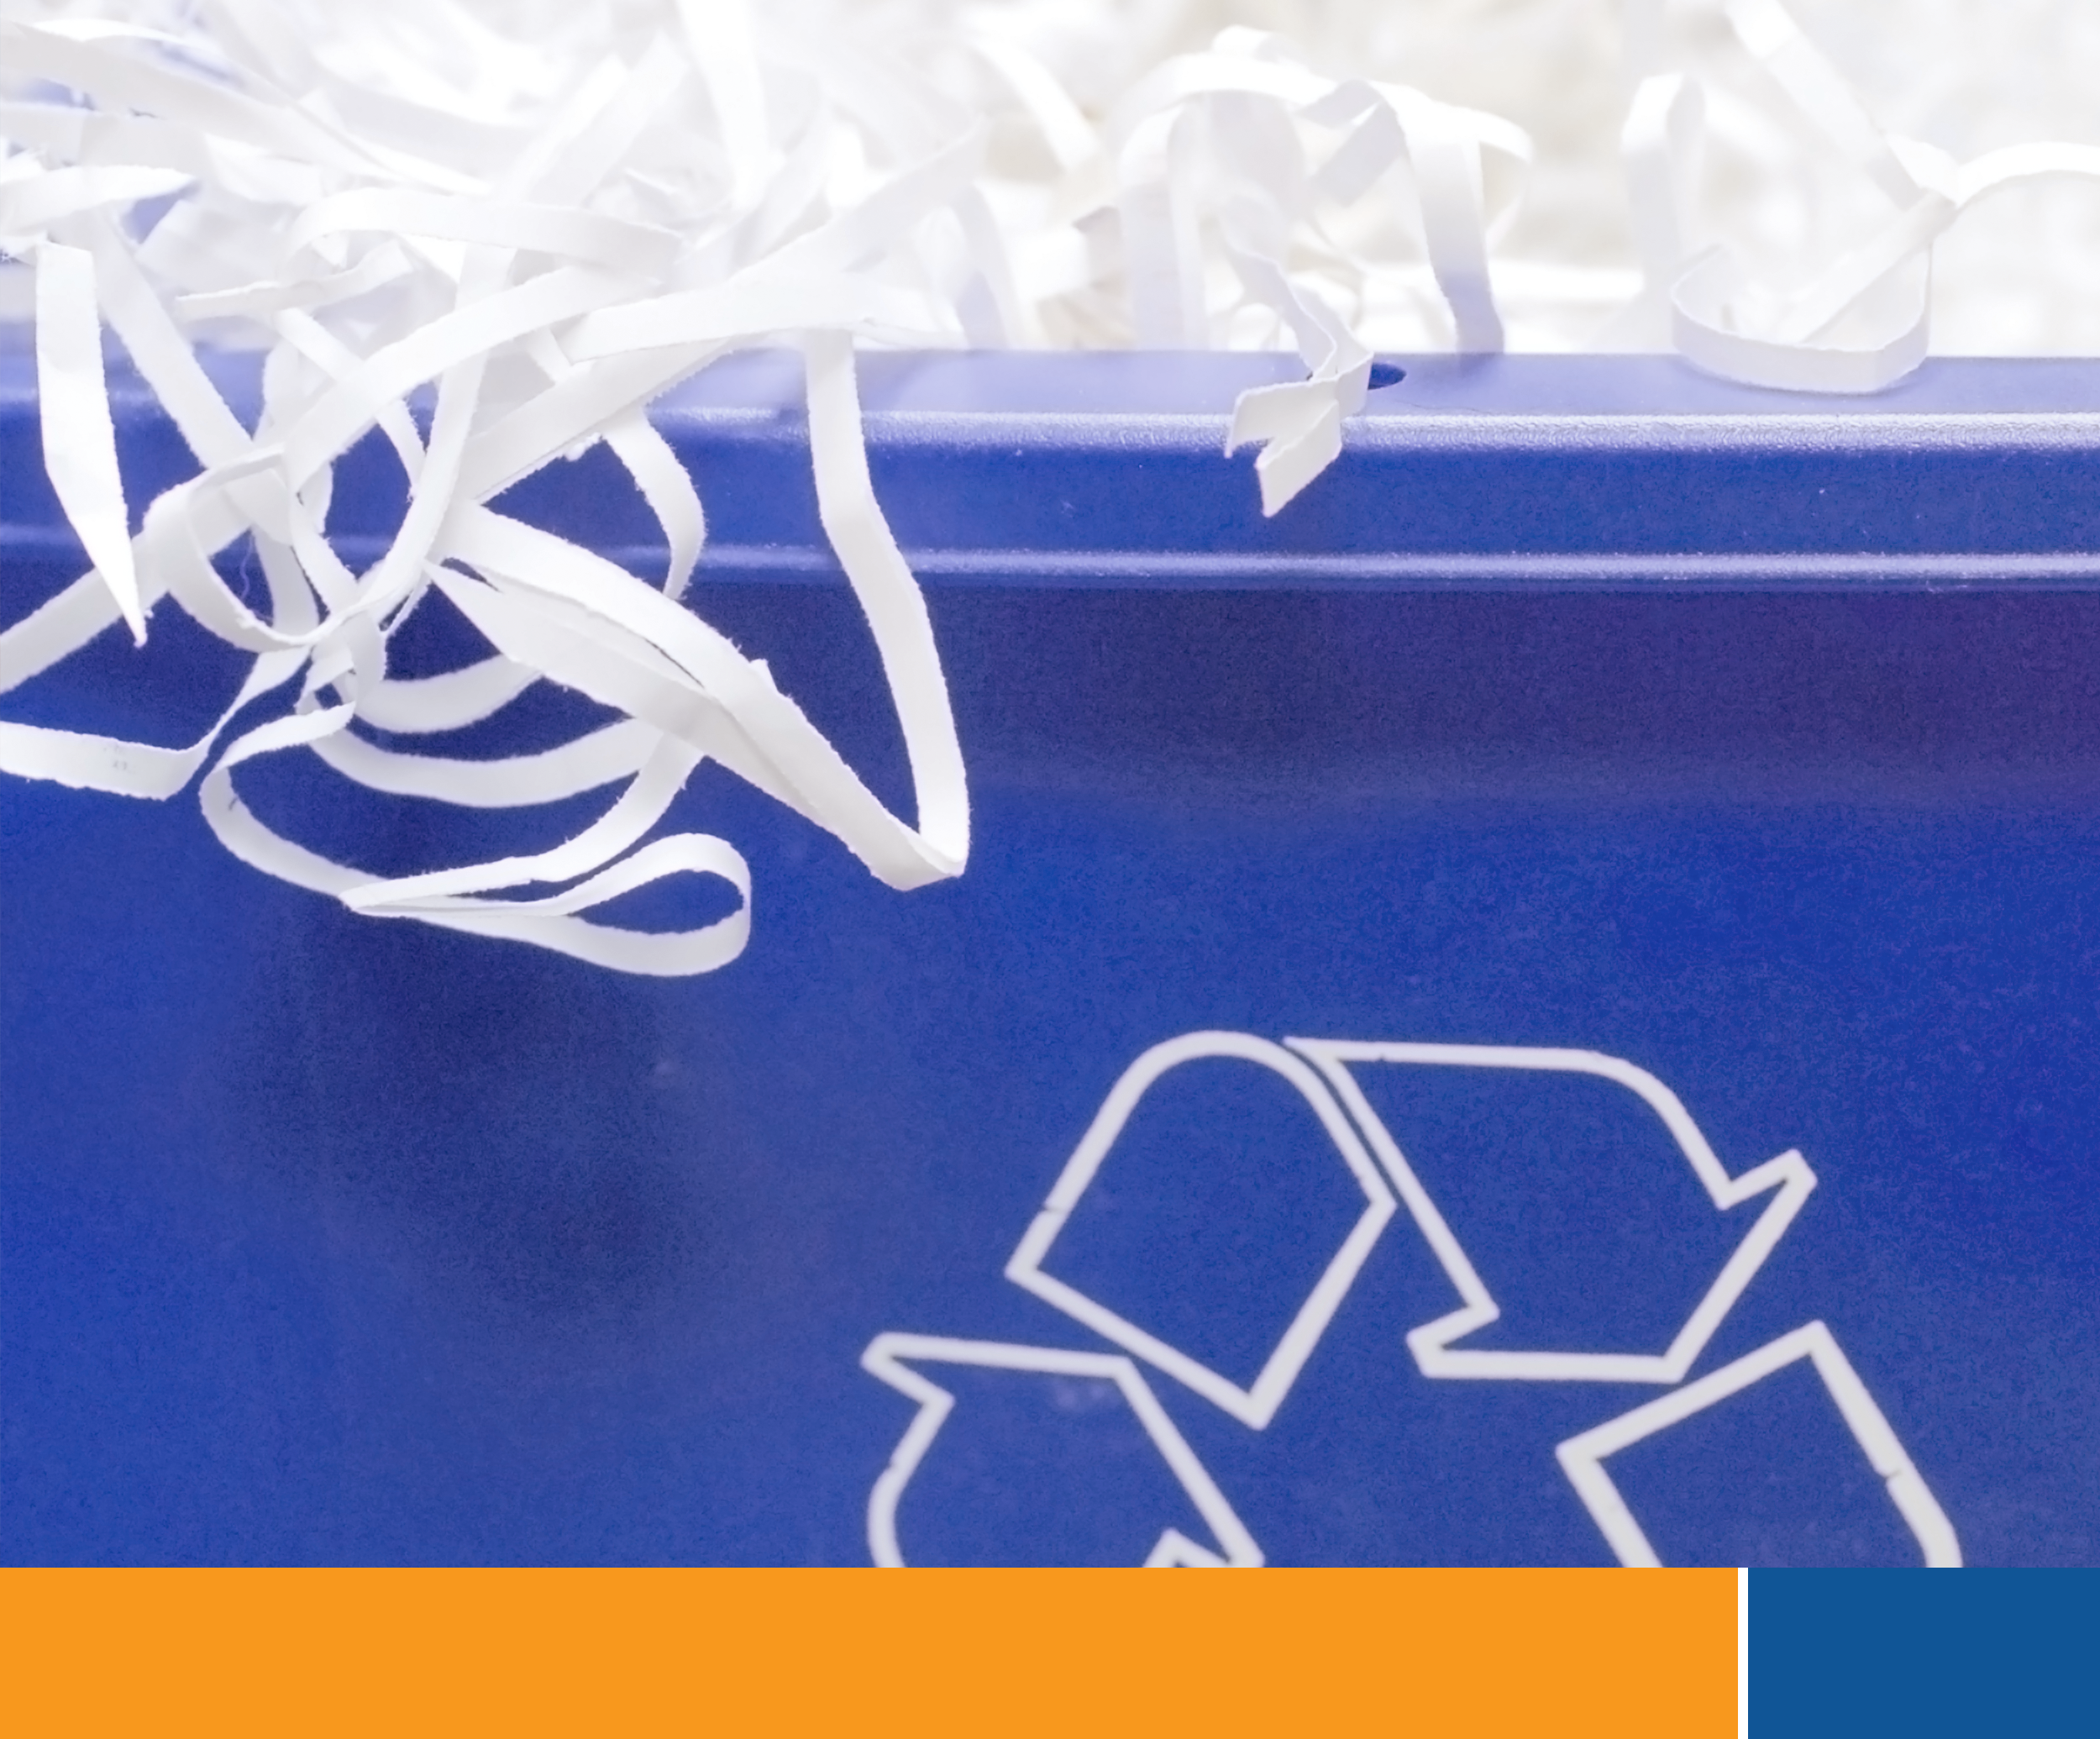 Which documents should you shred? Learn more at Central Sunbelt FCU